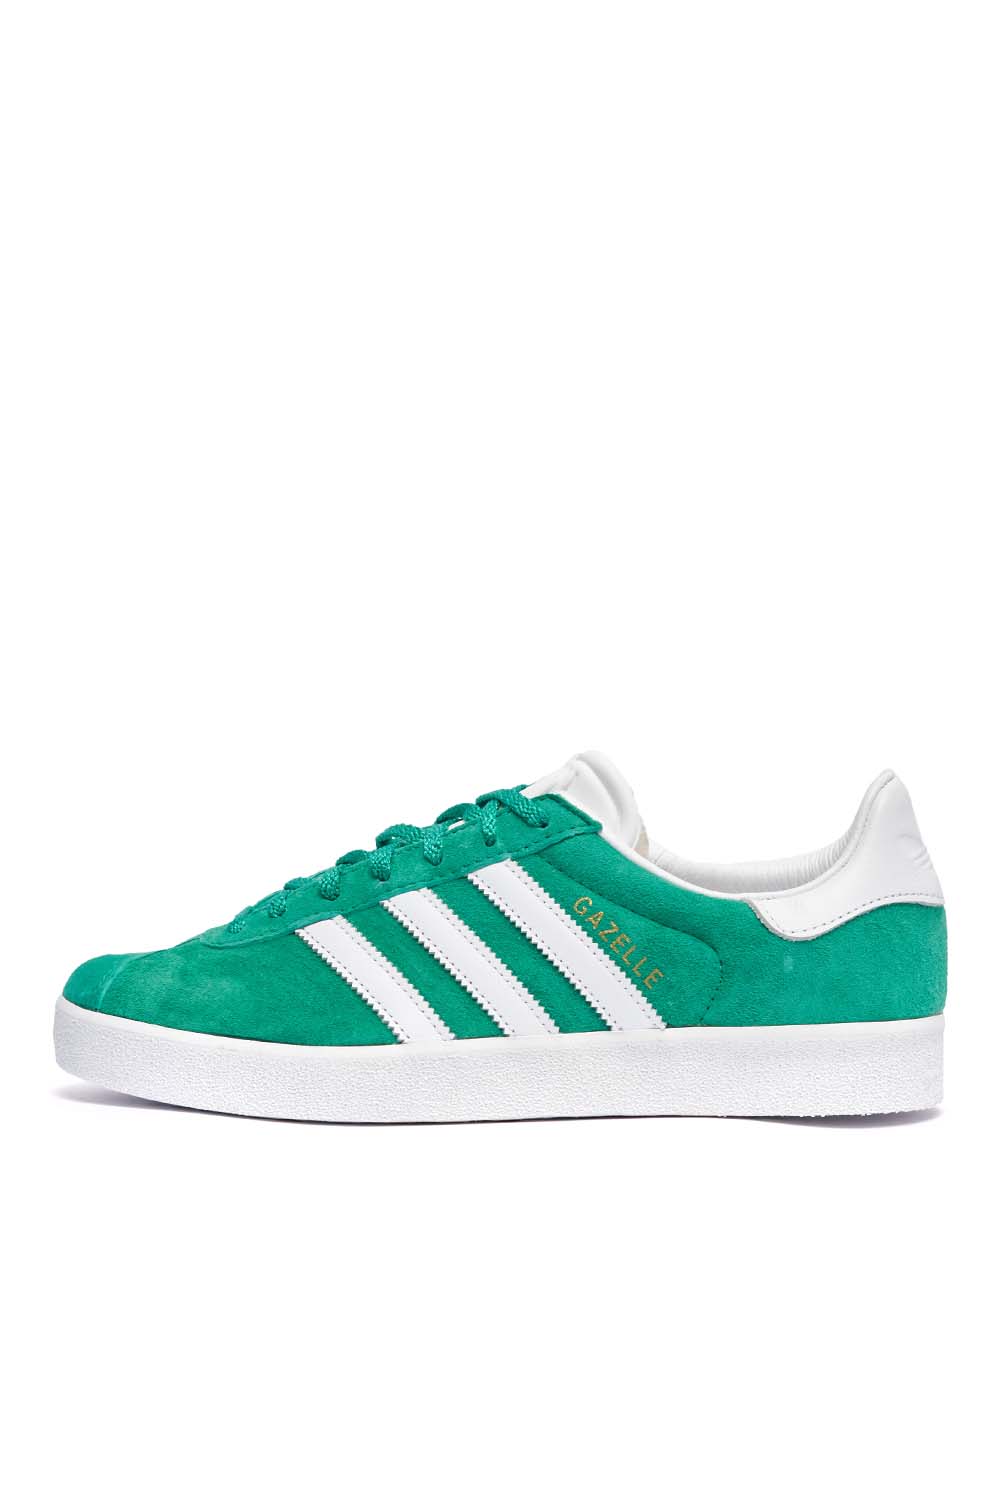 Adidas Gazelle 85 Shoes 'College Green' |